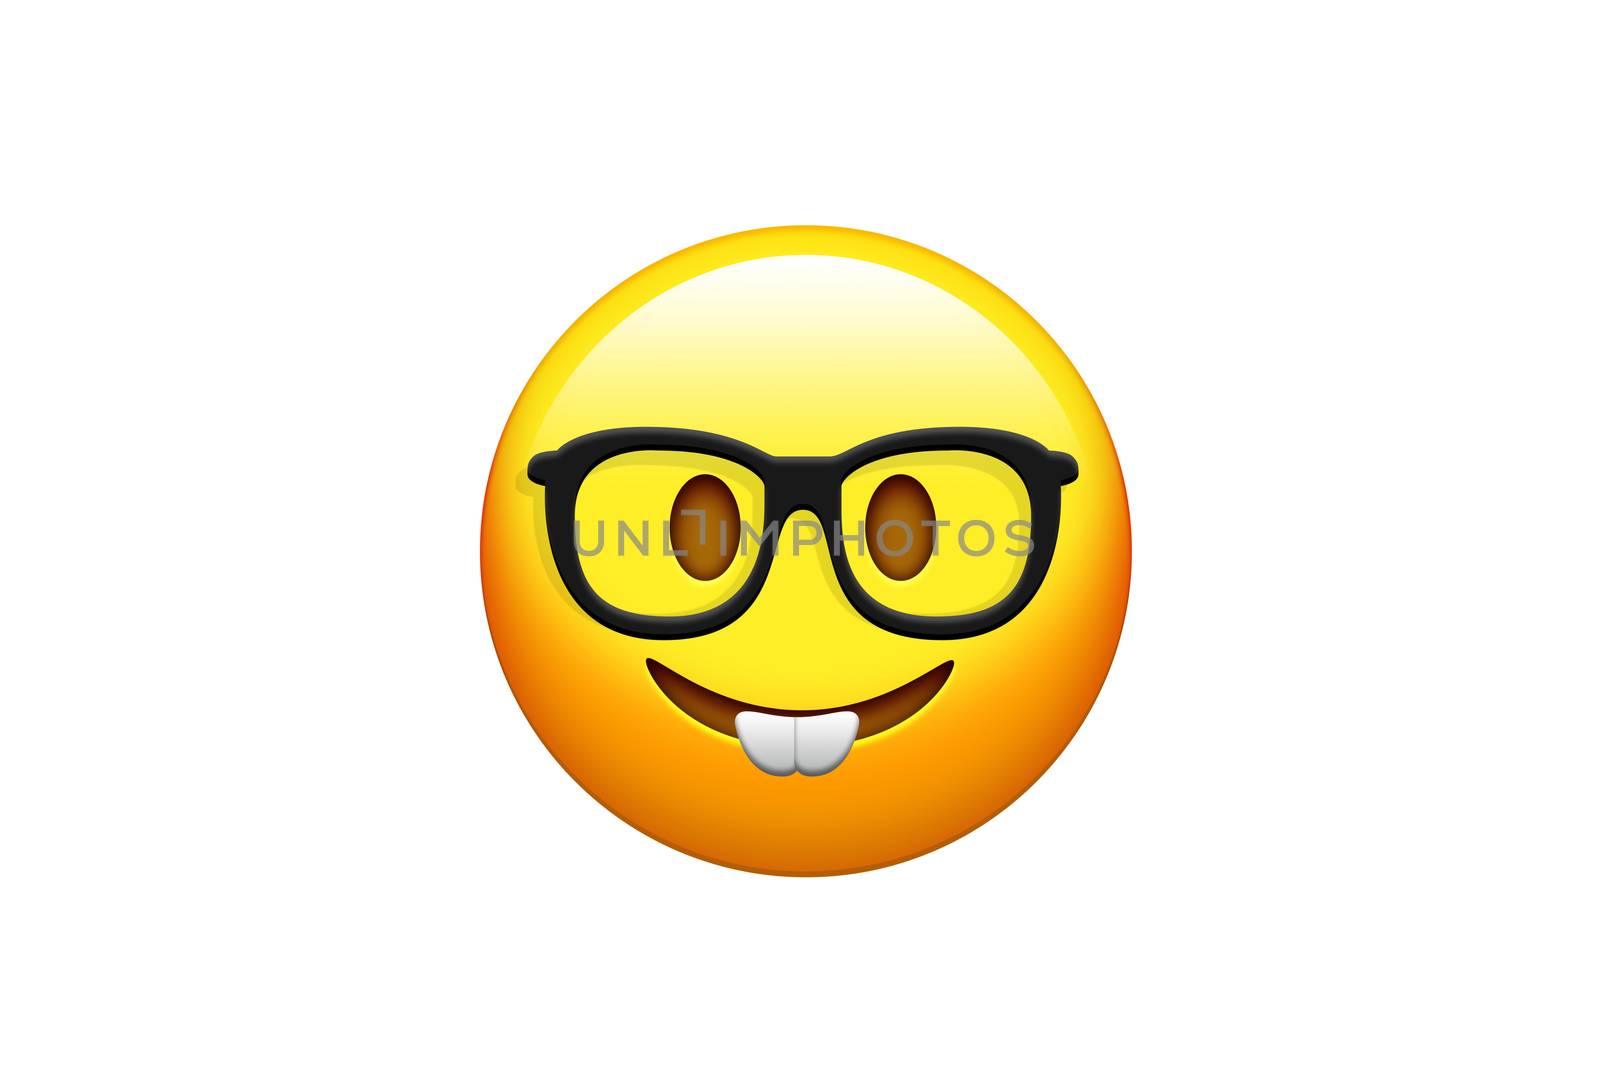 The emoji yellow happy face with white teeth and glasses icon